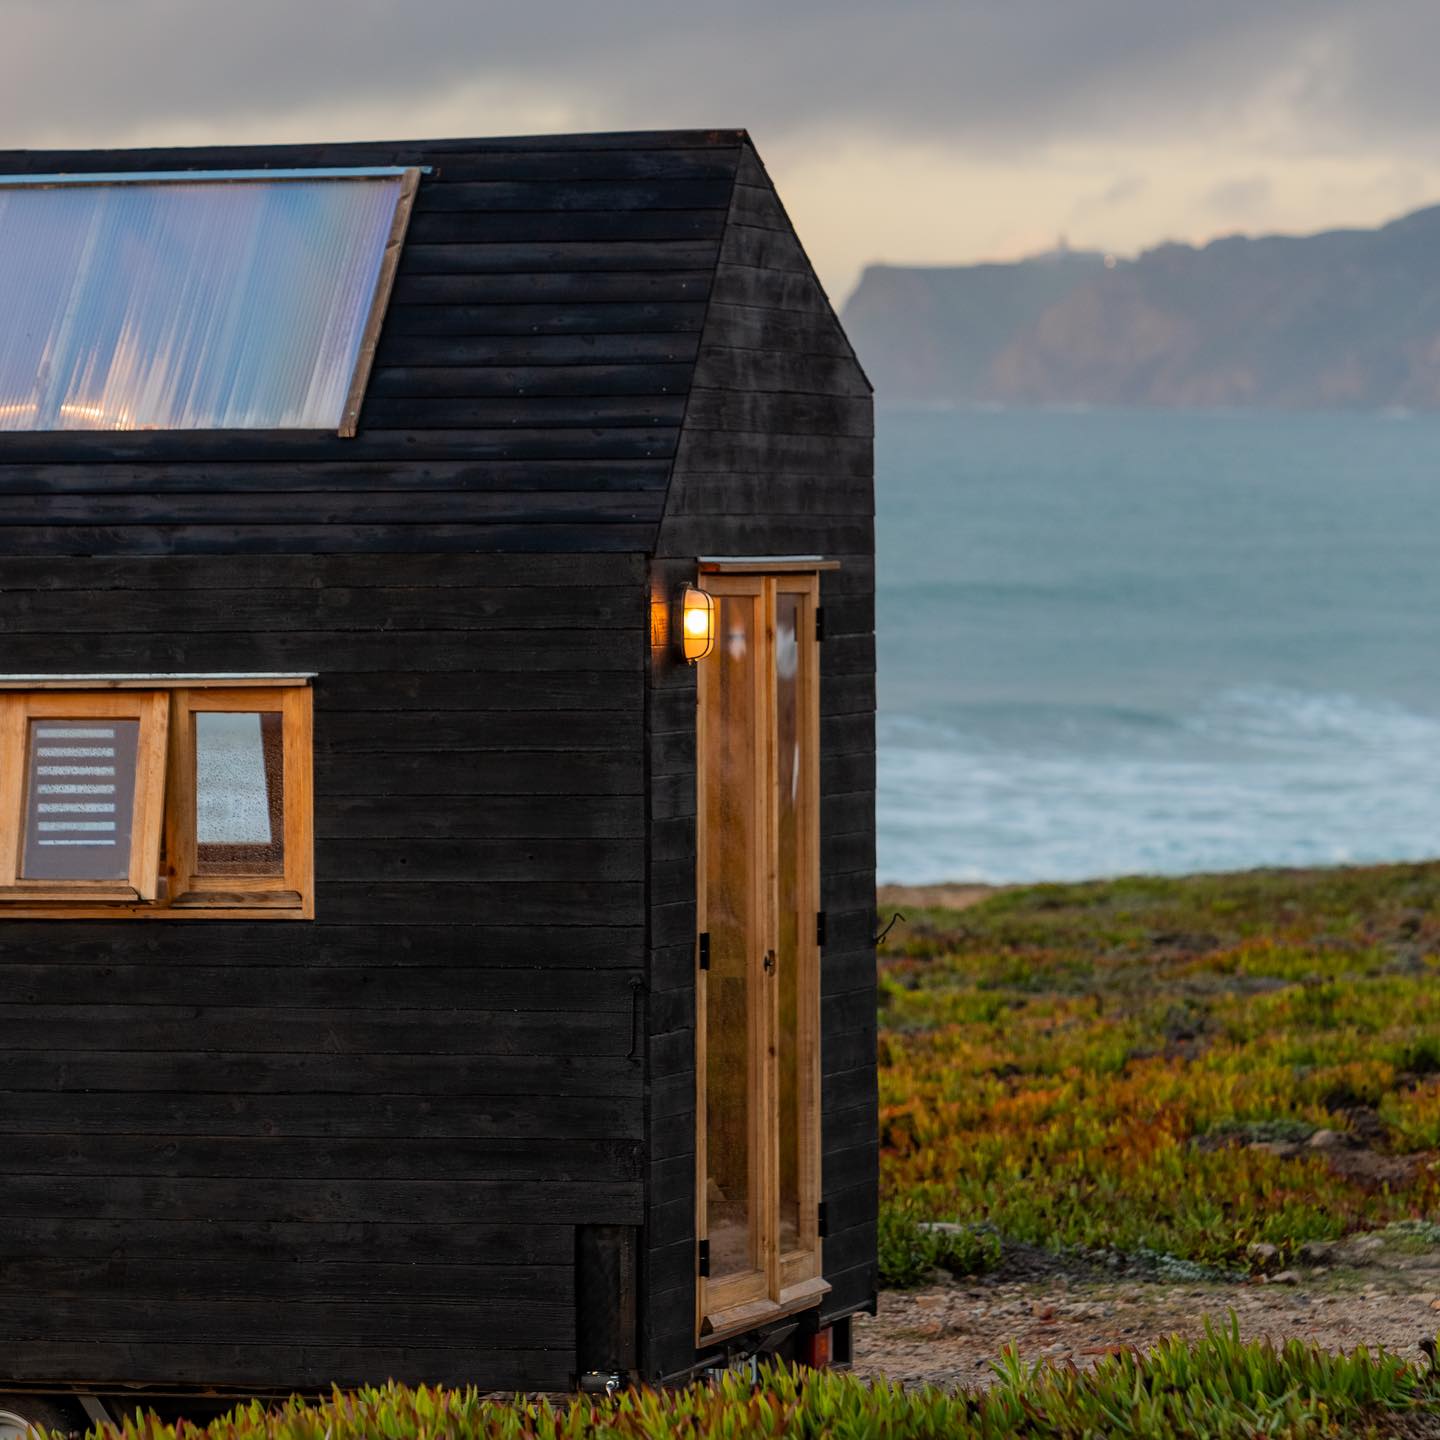 https://s1.cdn.autoevolution.com/images/news/gallery/this-off-grid-tiny-house-is-perfect-for-a-simpler-more-sustainable-lifestyle_2.jpg